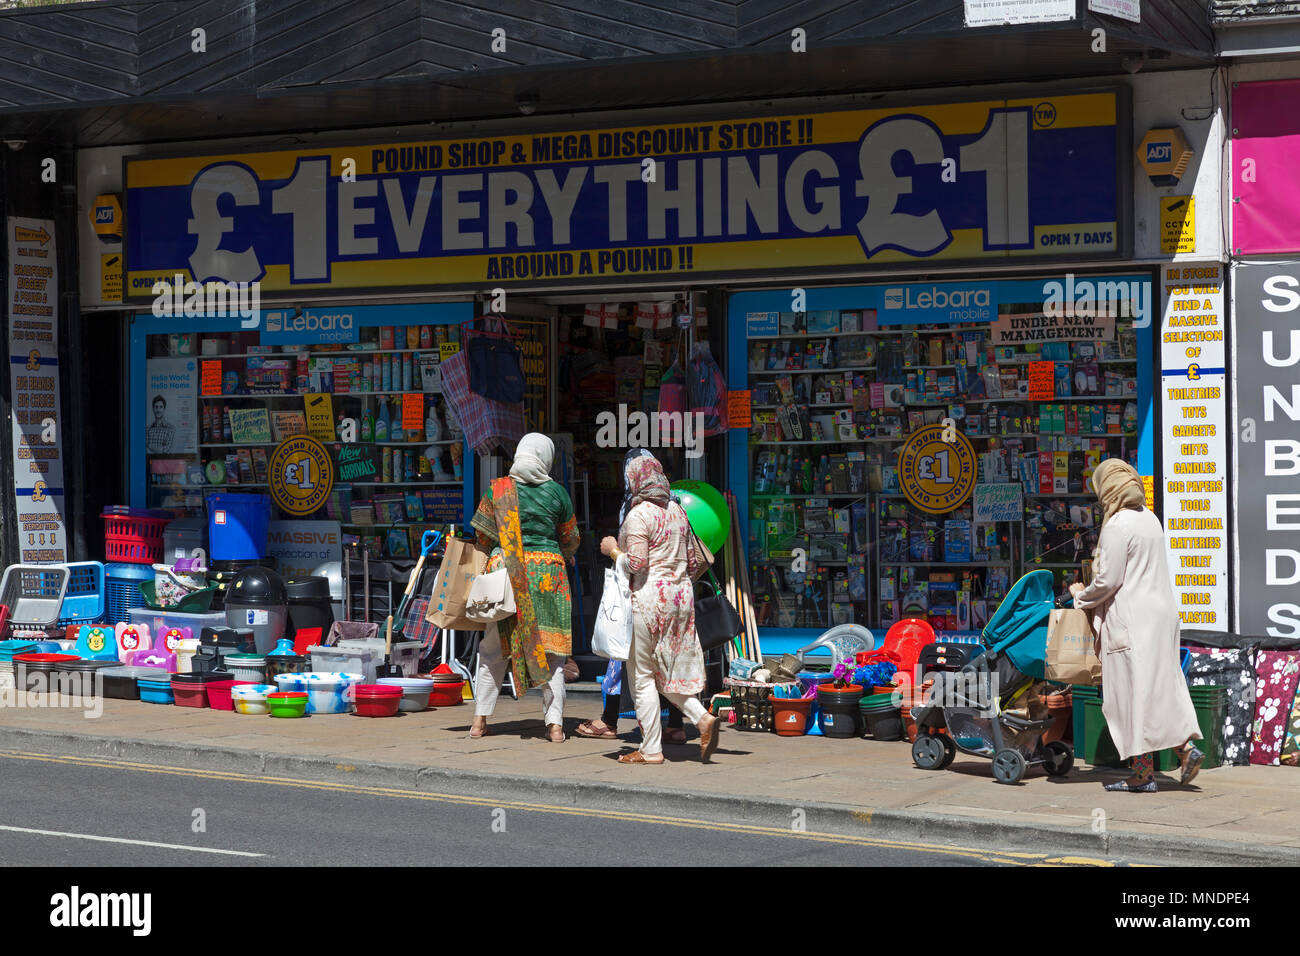 Group of Asian women at a pound shop, Bradford, West Yorkshire Stock Photo